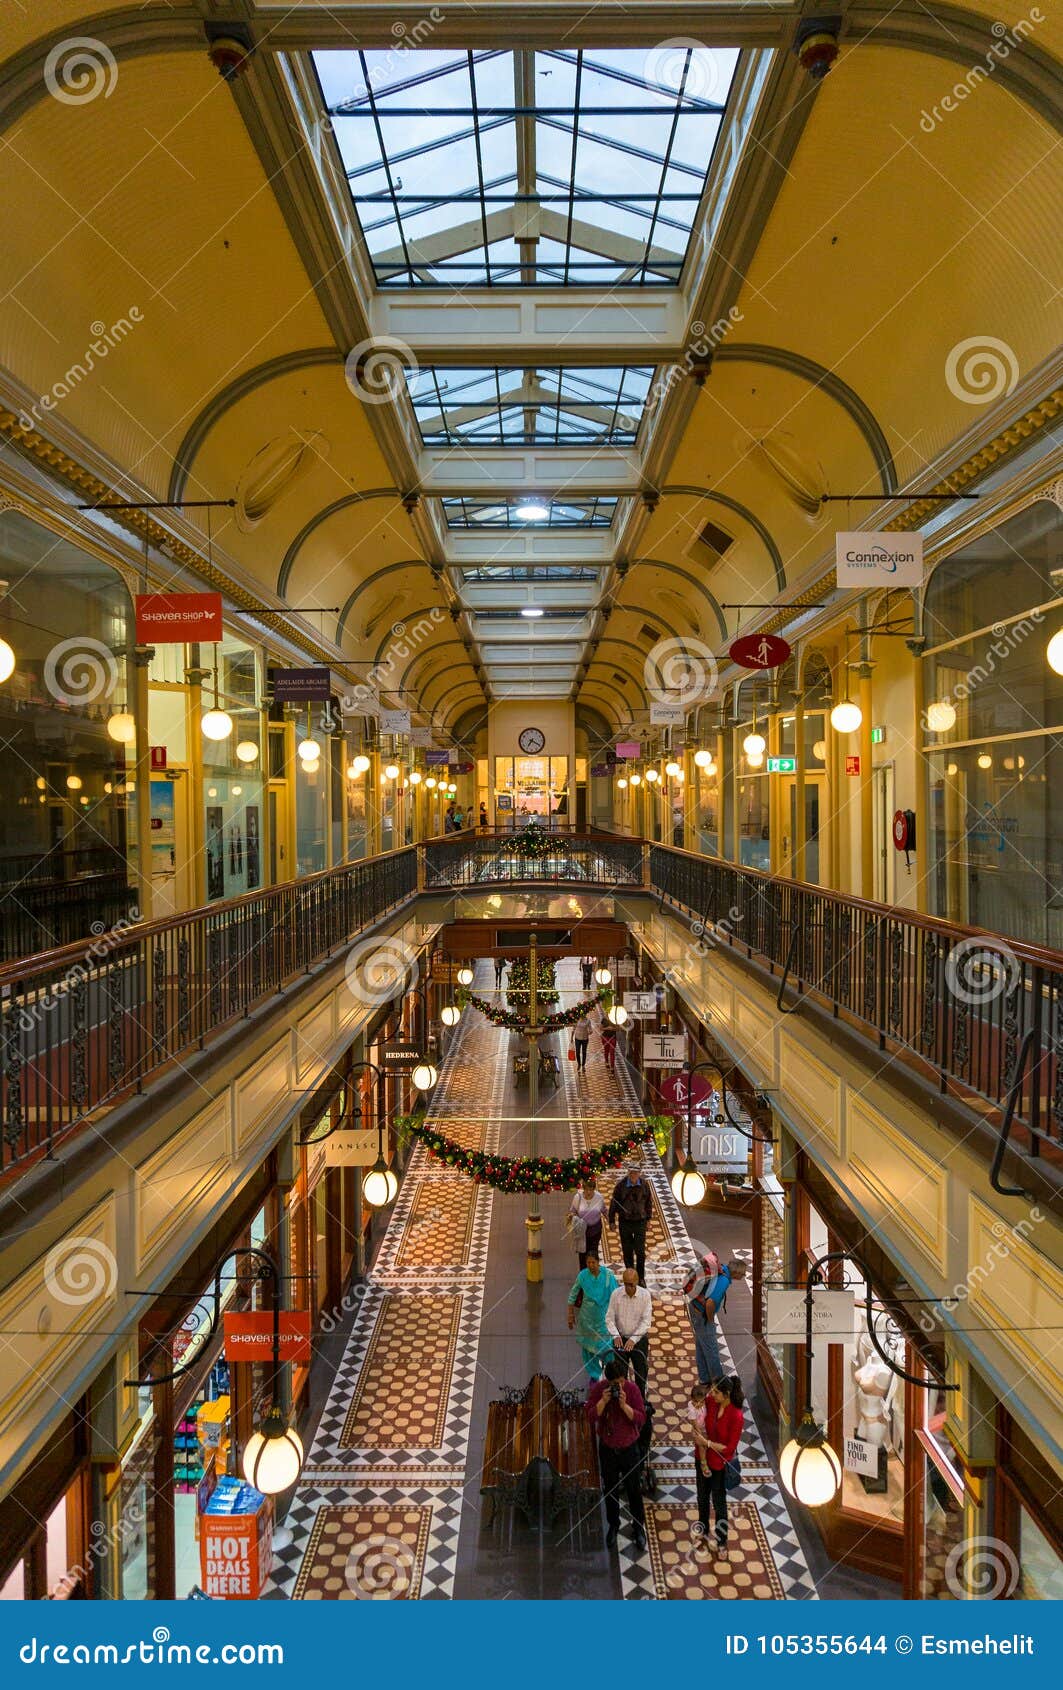 Adelaide Arcade with Christmas Decorations Editorial Stock Image